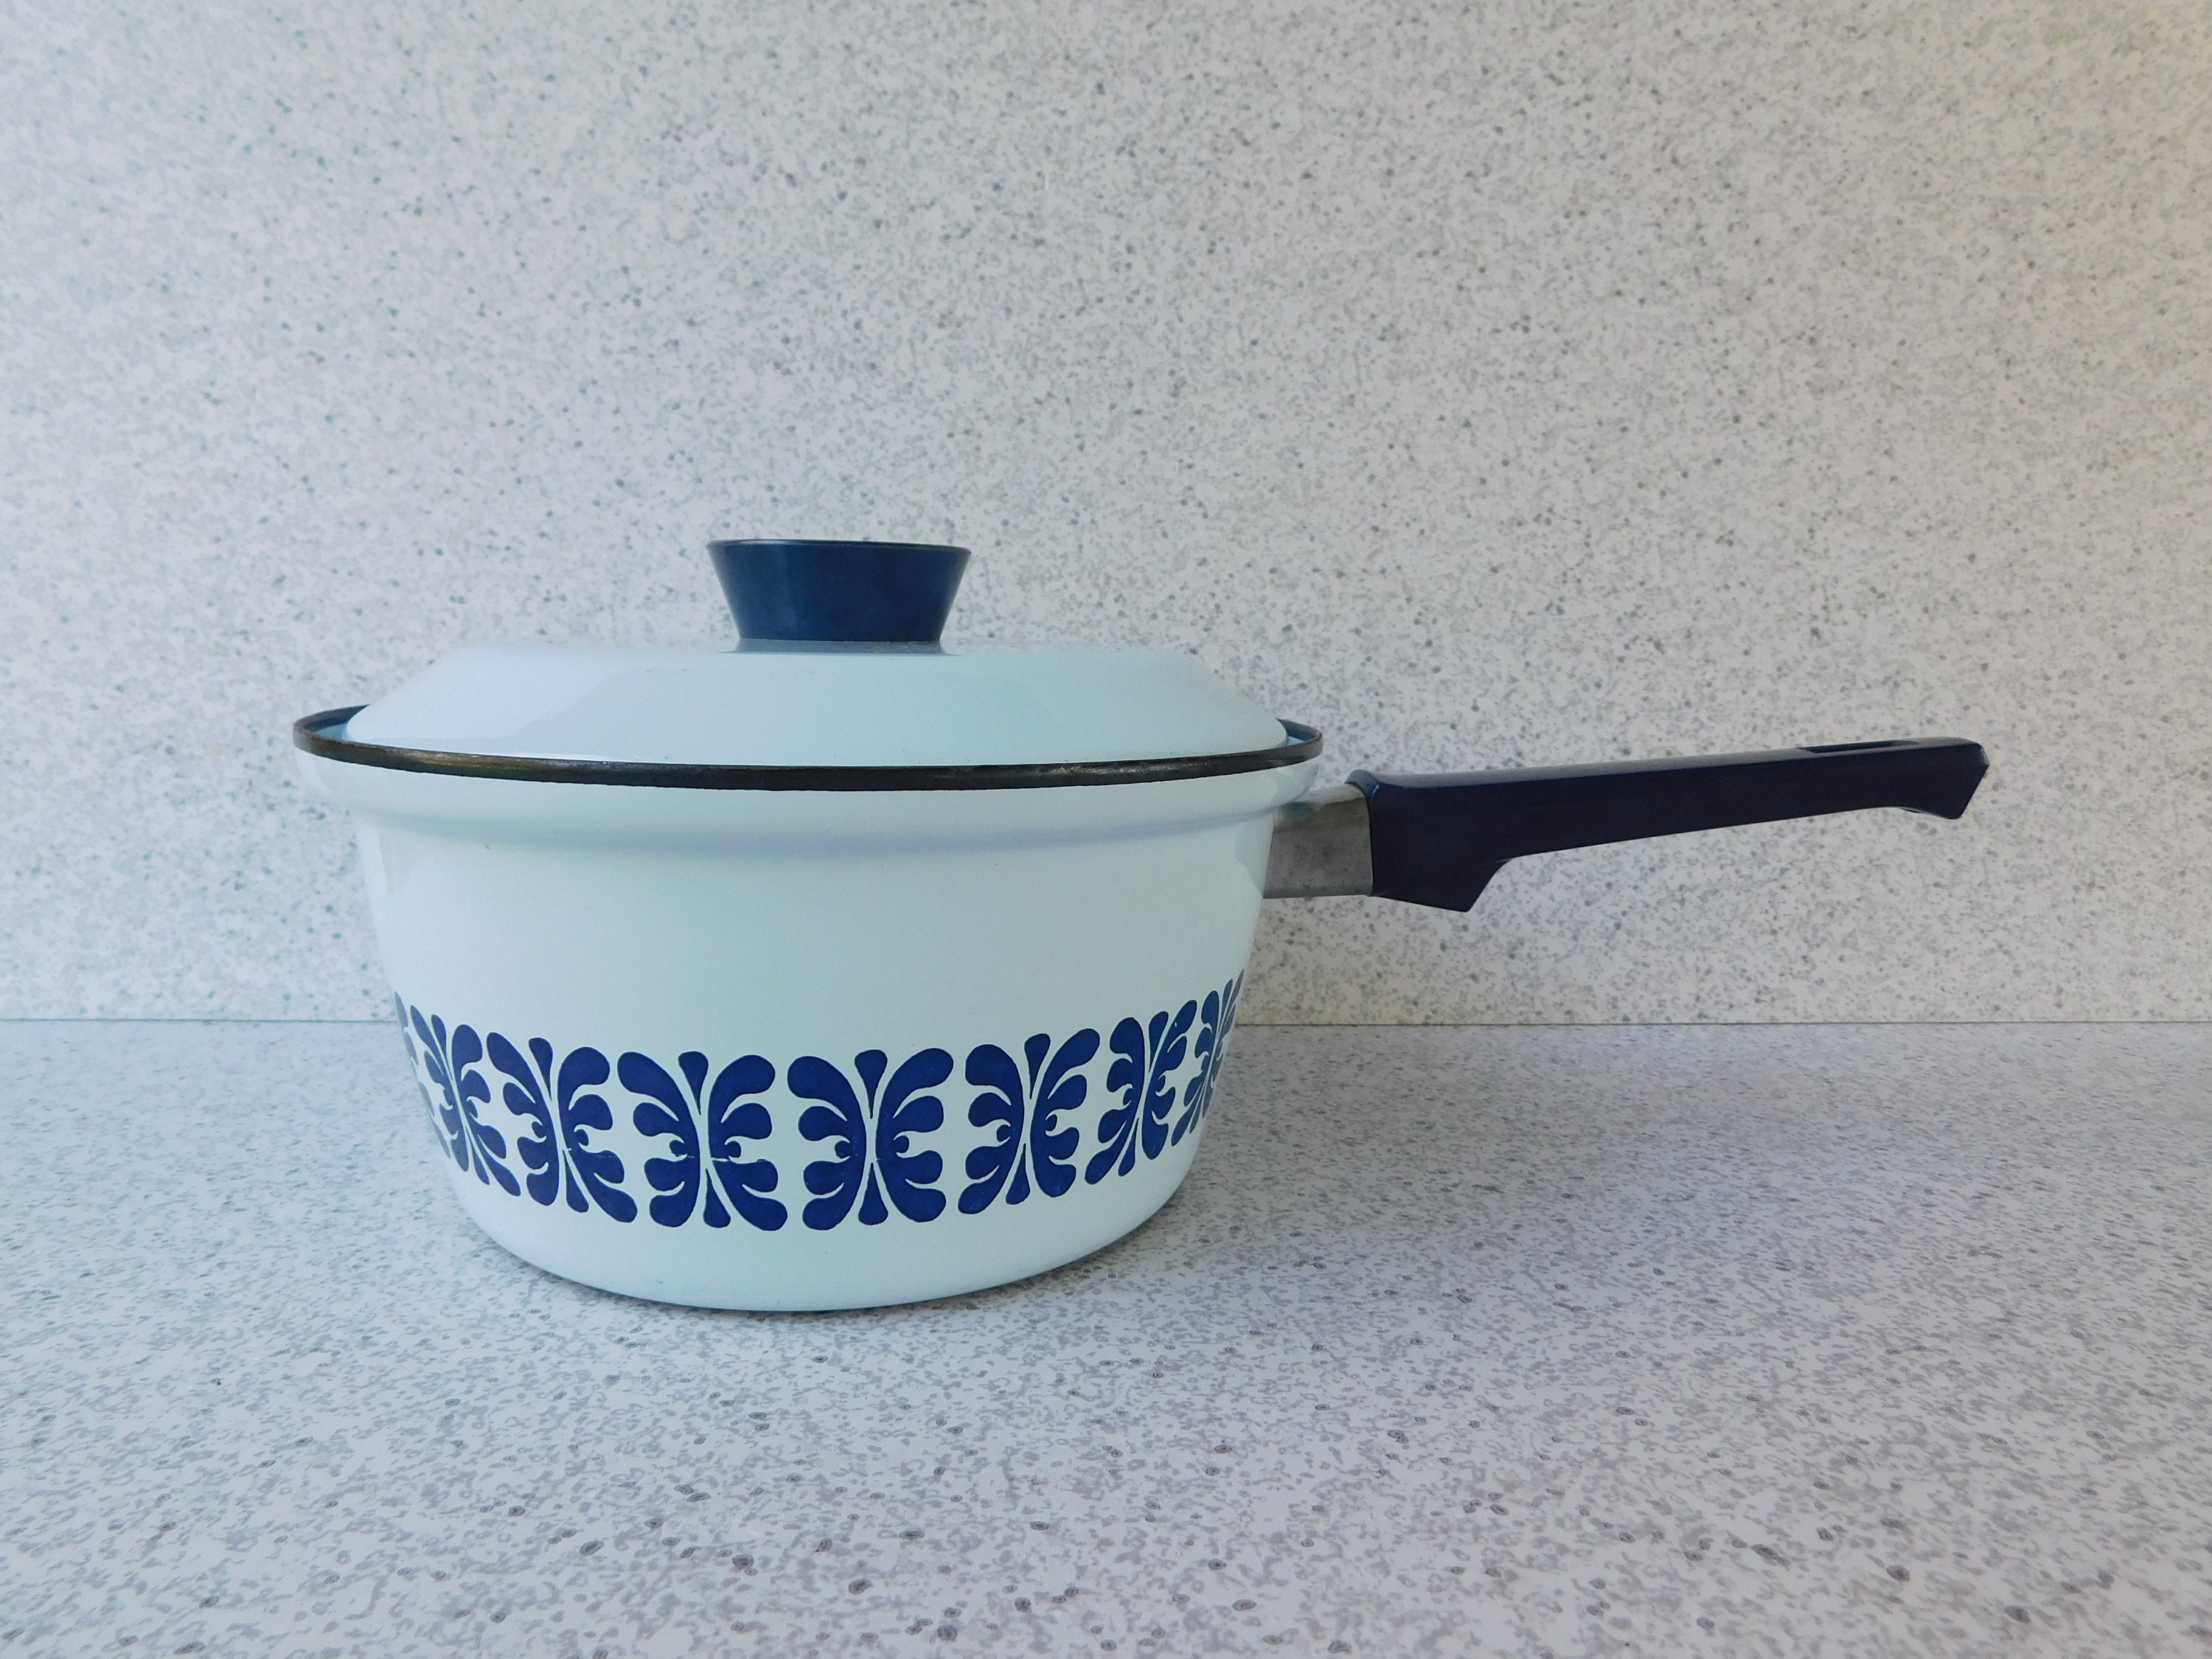 Enameled Cast Iron 2 Quart Sauce Pan with Lid - Blue – Eco + Chef